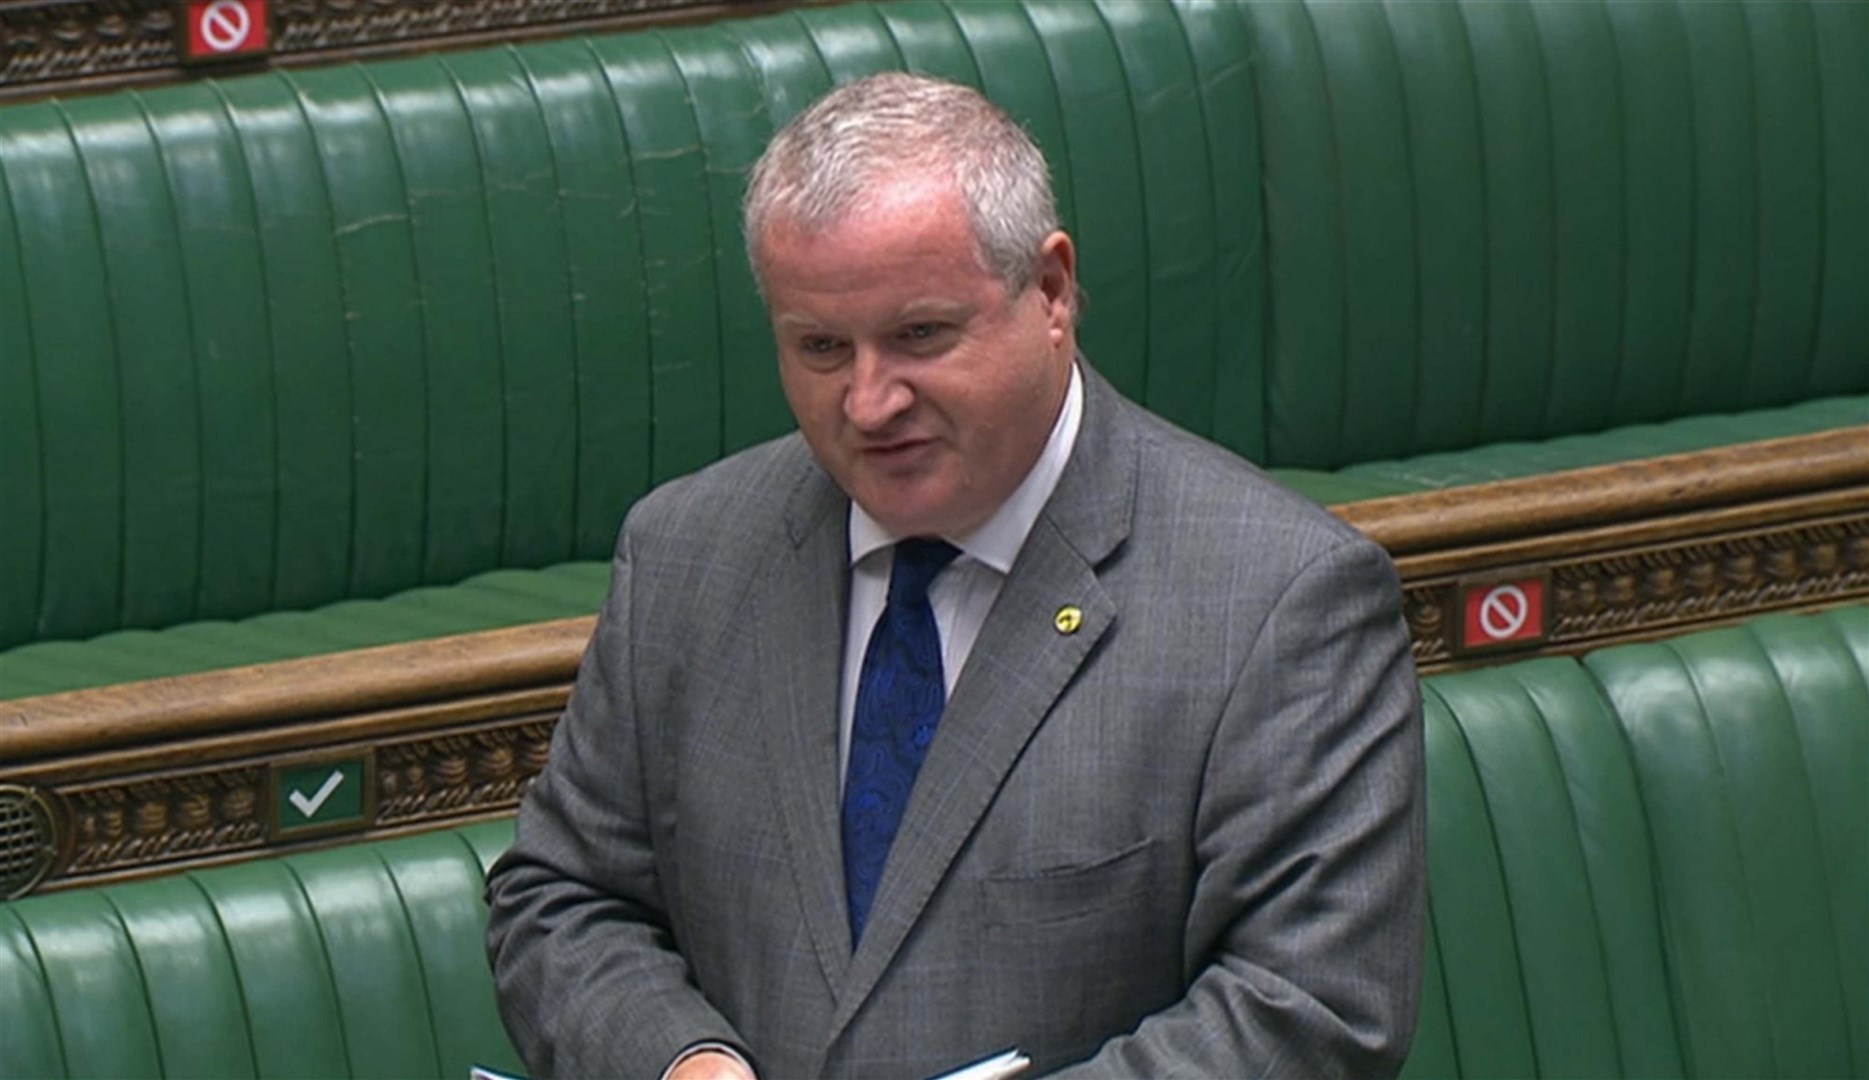 SNP Westminster leader Ian Blackford speaking during Prime Minister’s Questions (PA)